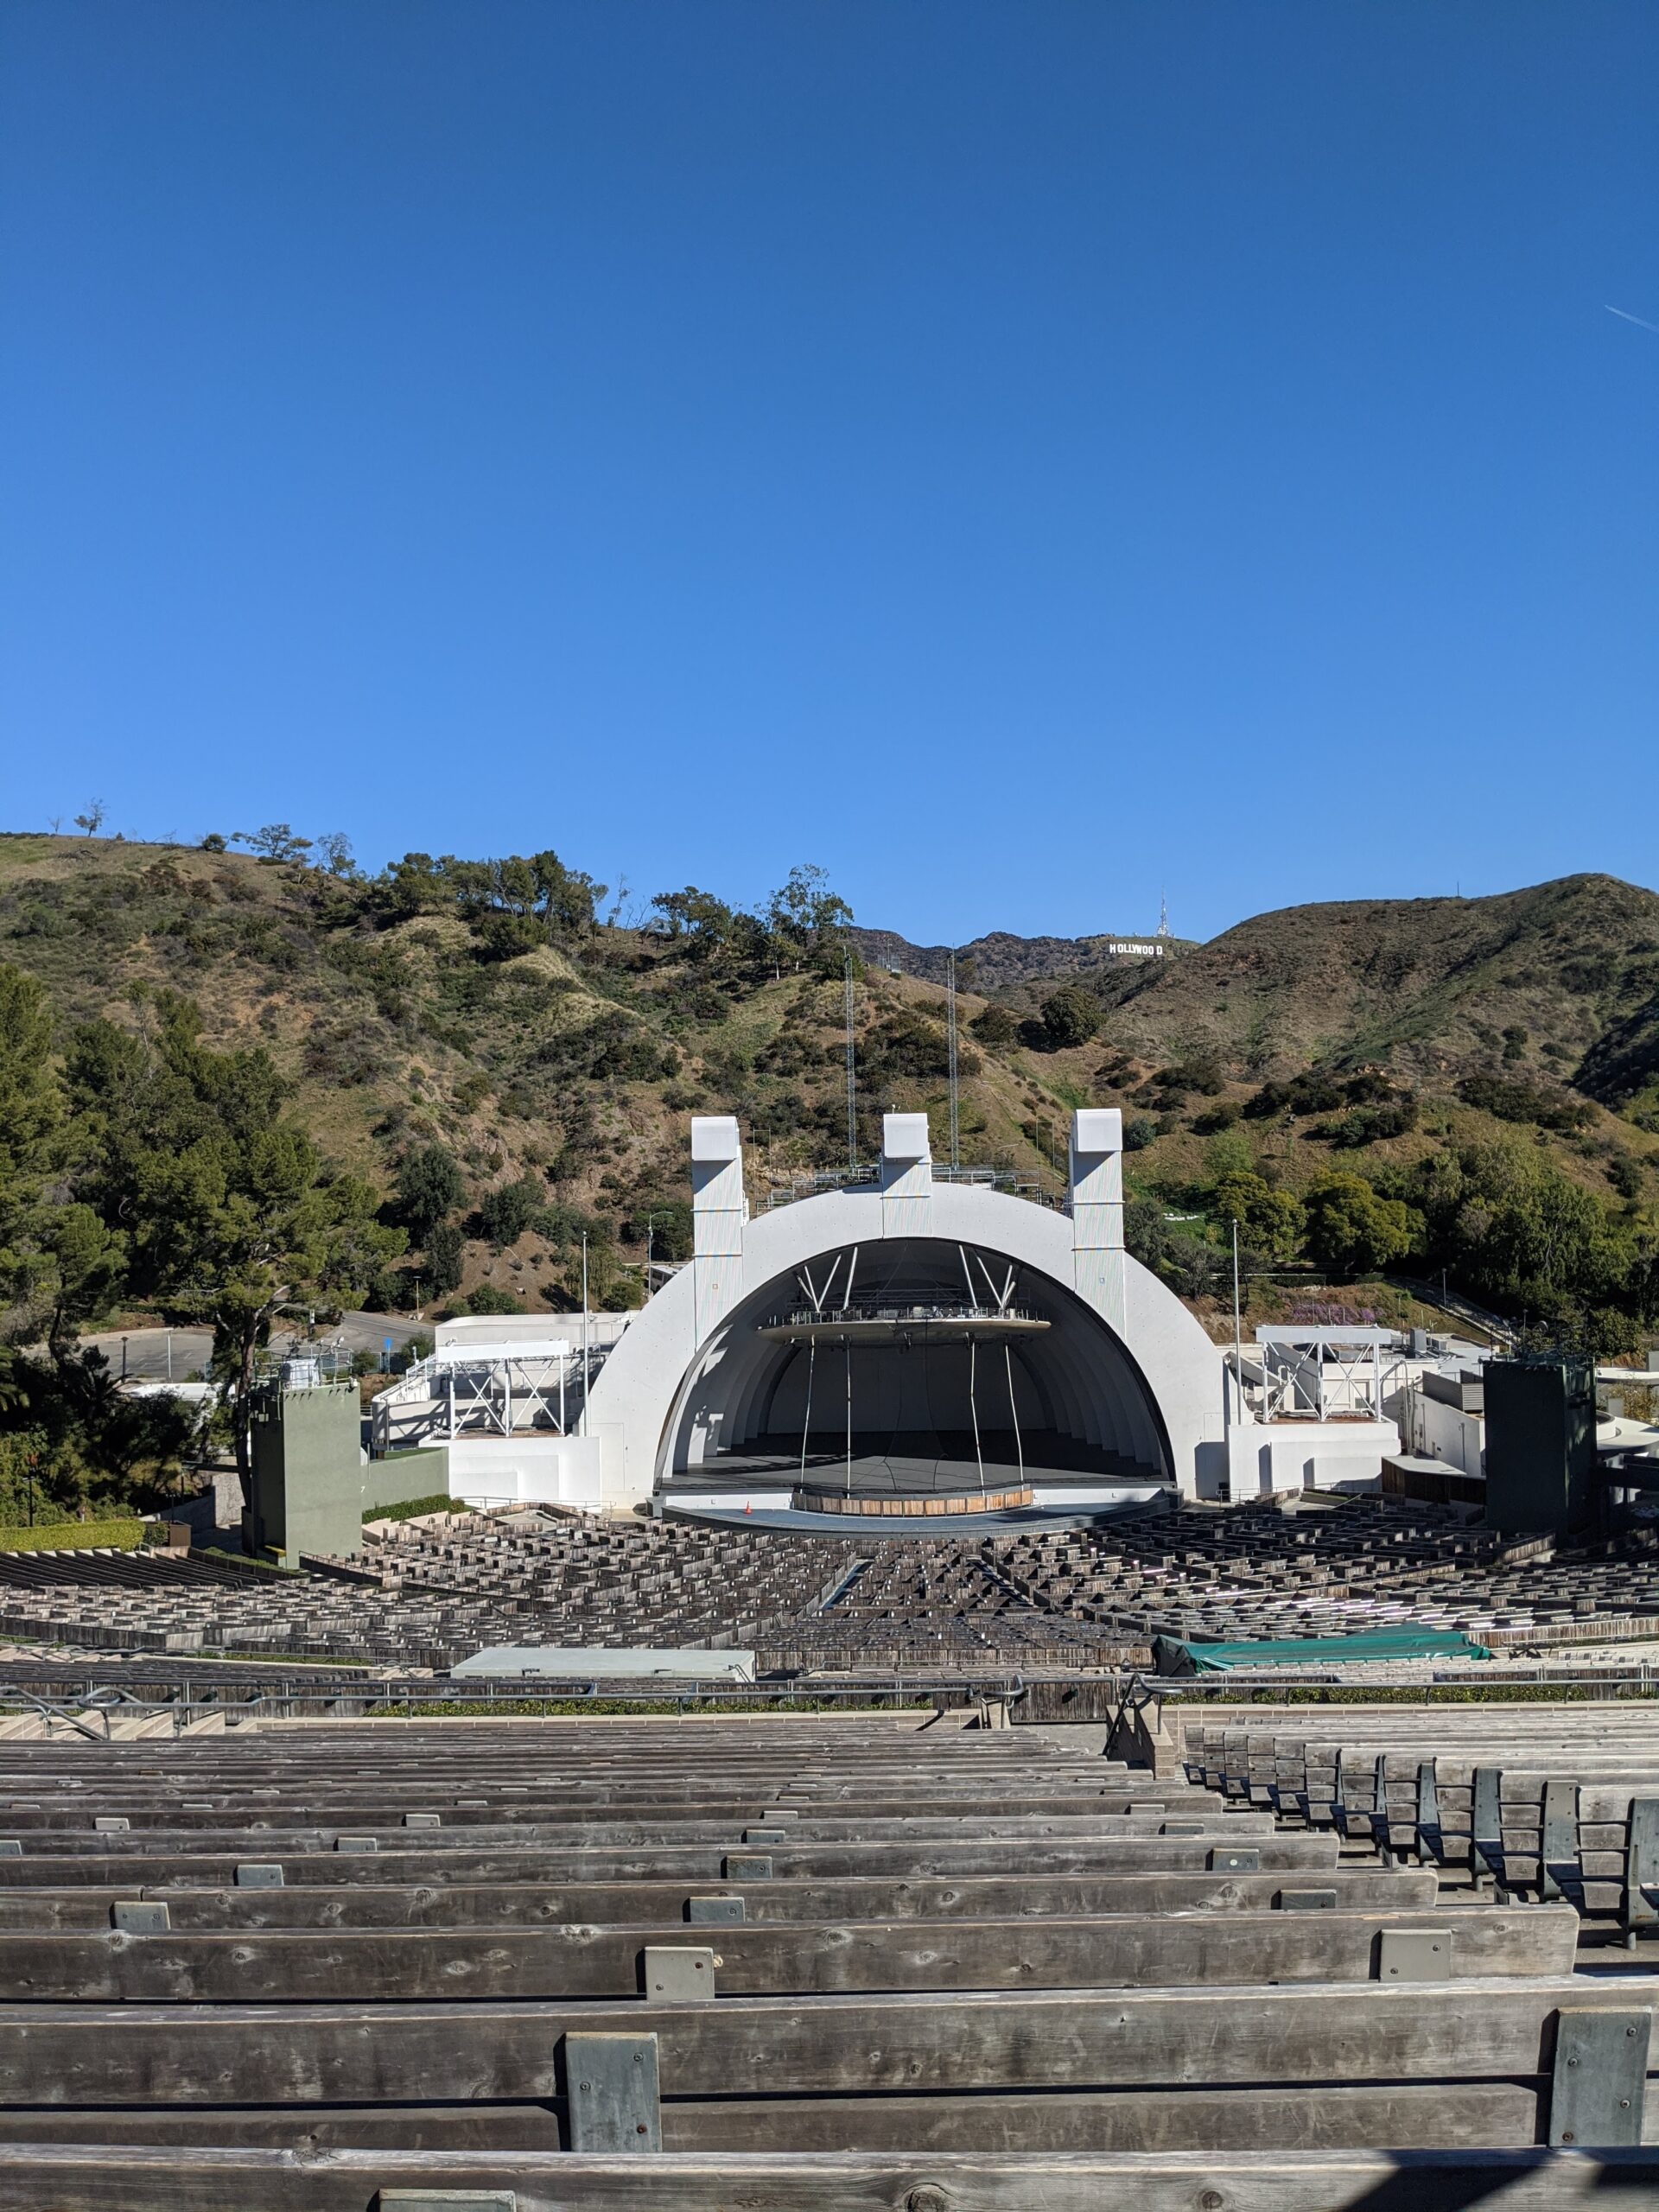 View of the Hollywood Bowl at the top of the seating area with distant iconic Hollywood sign in the peaks above.